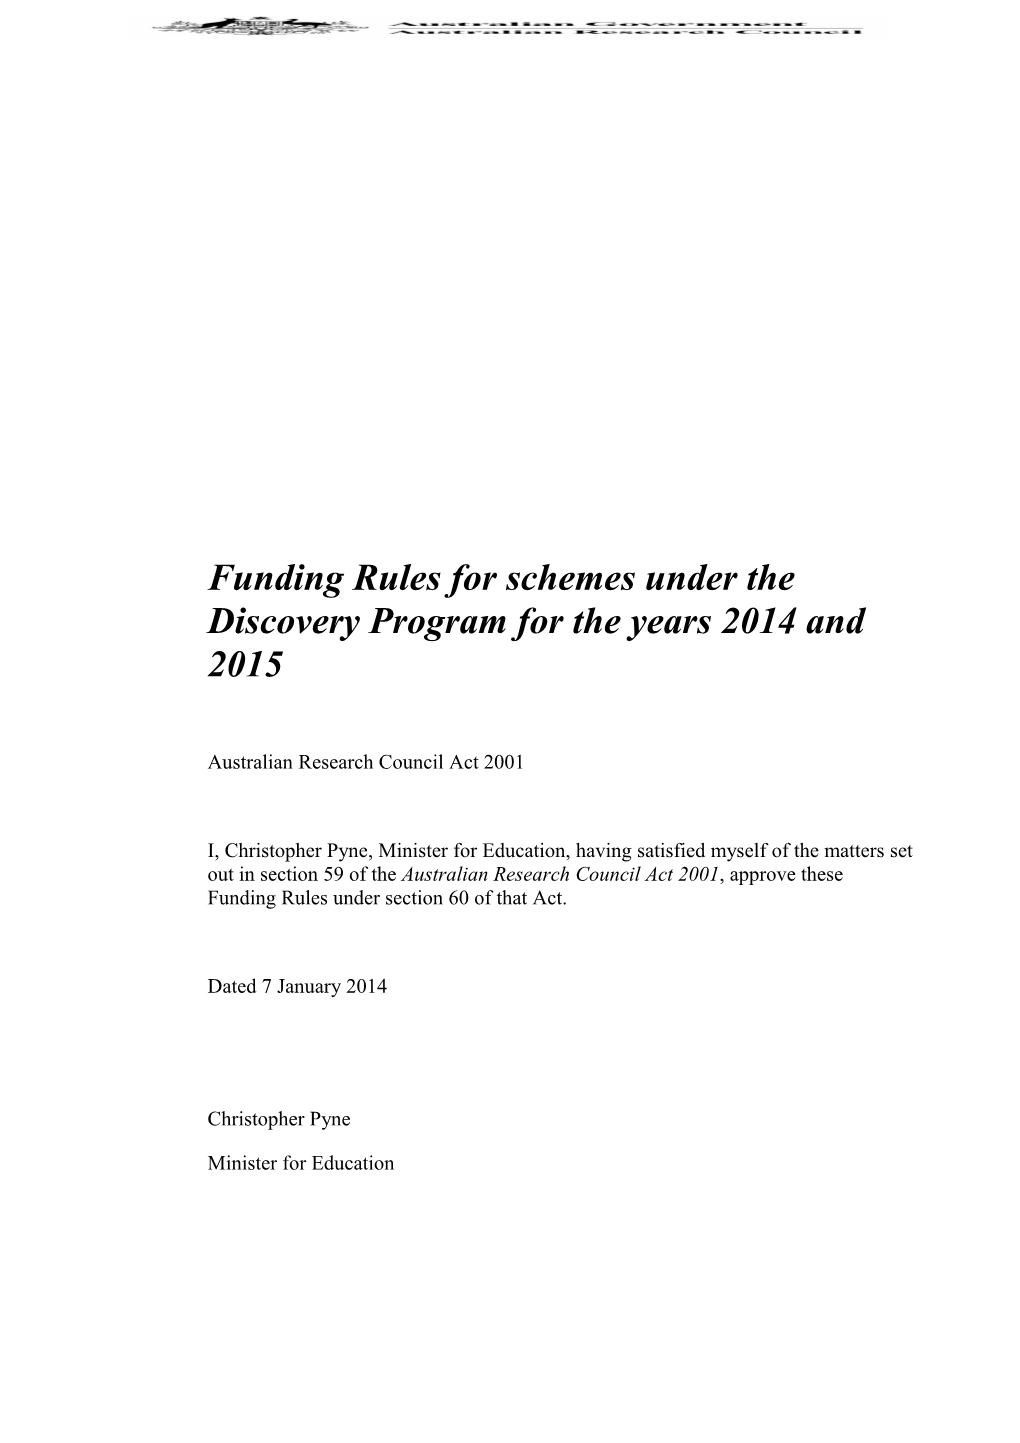 Funding Rules for Schemes Under the Discovery Program for the Years 2014 and 2015